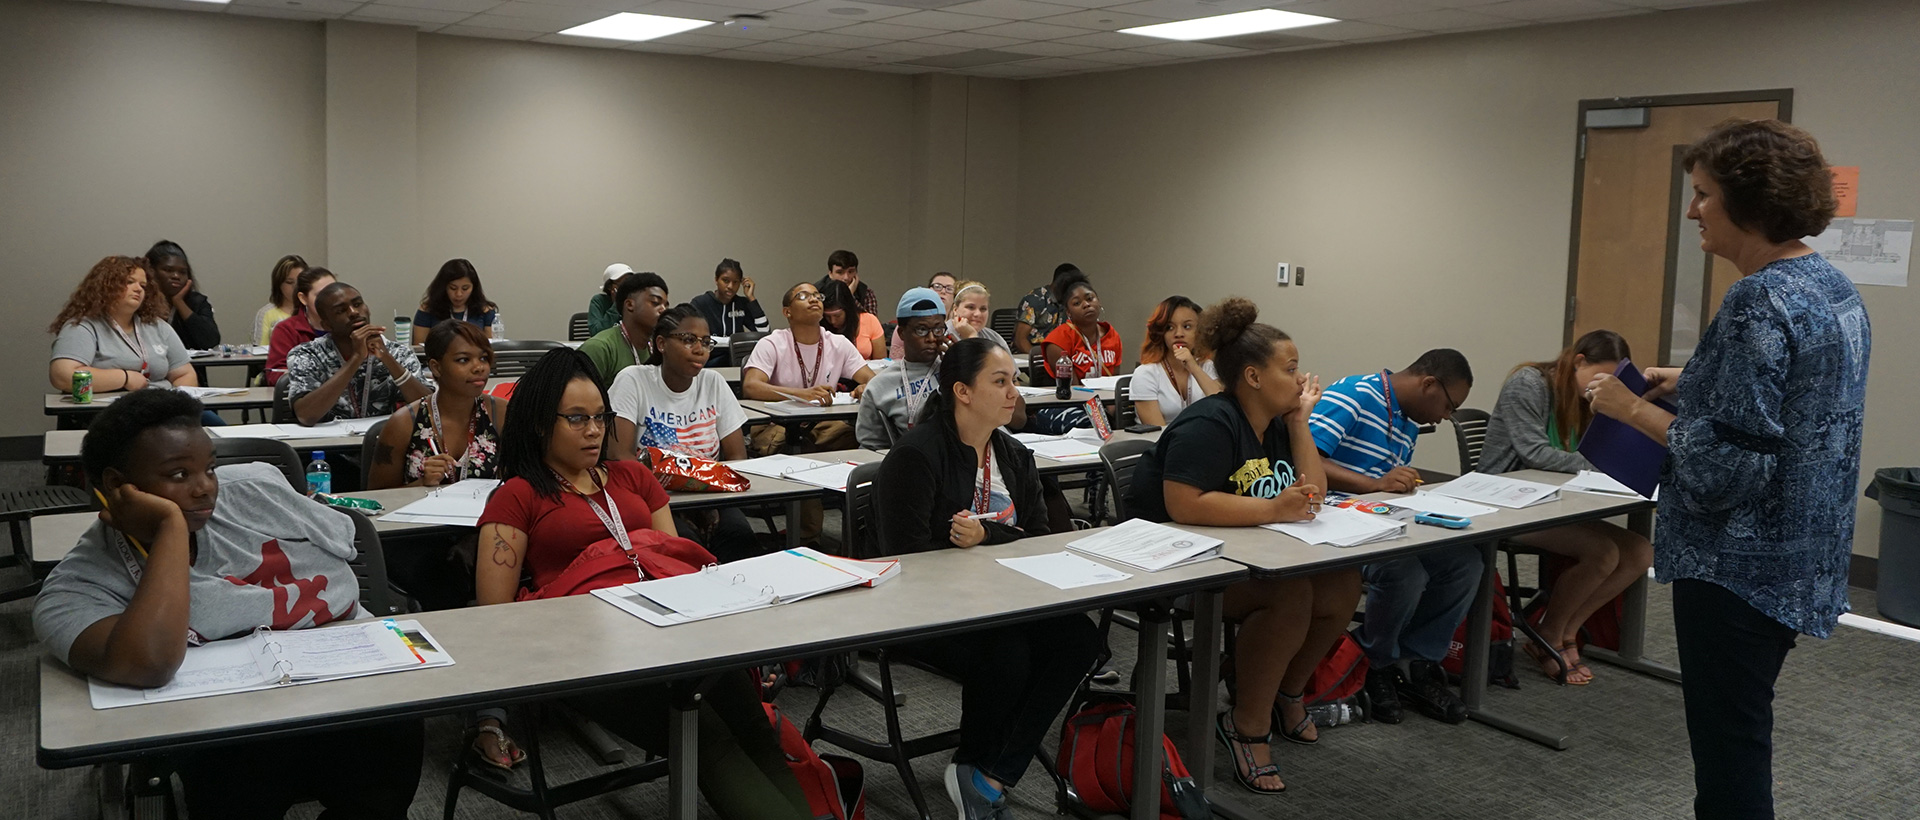 Youth experiencing college life first hand during a six week summer academy.